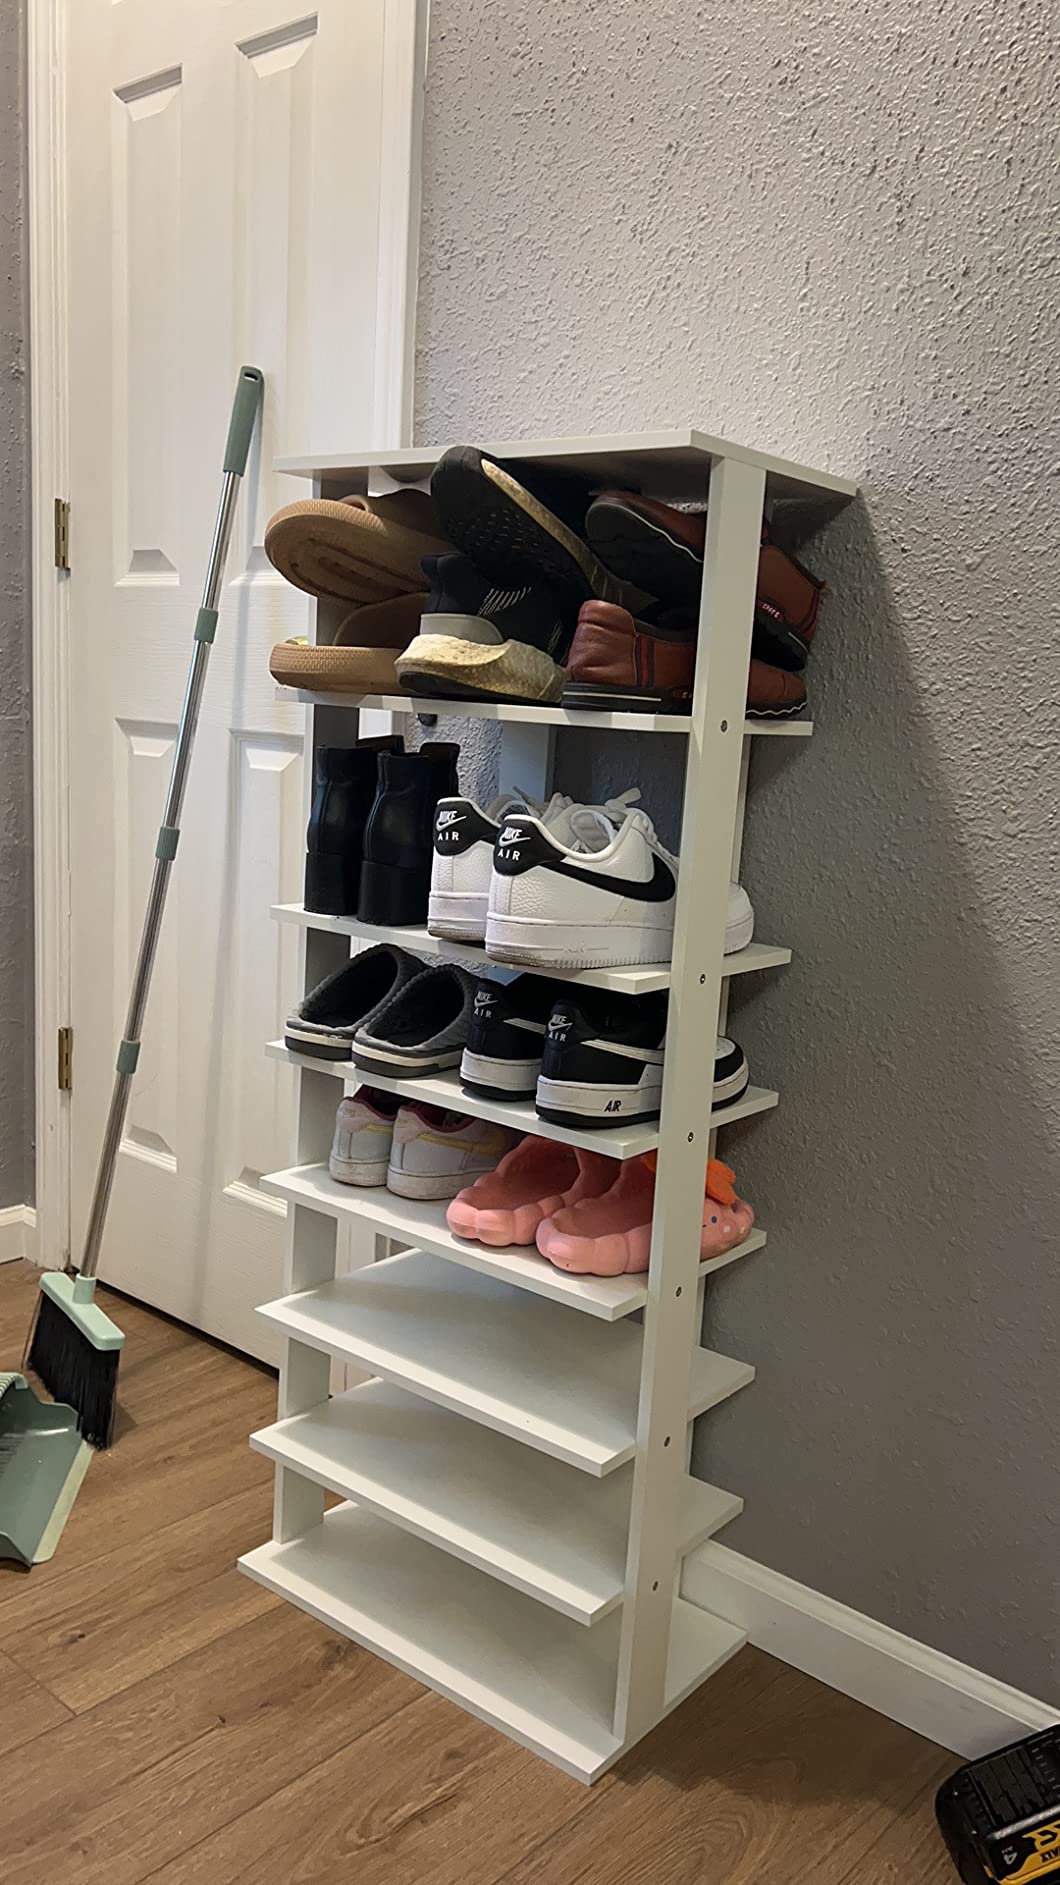 The shoe rack is of good quality and well worth buying. The shape is also beautiful and fashionable.